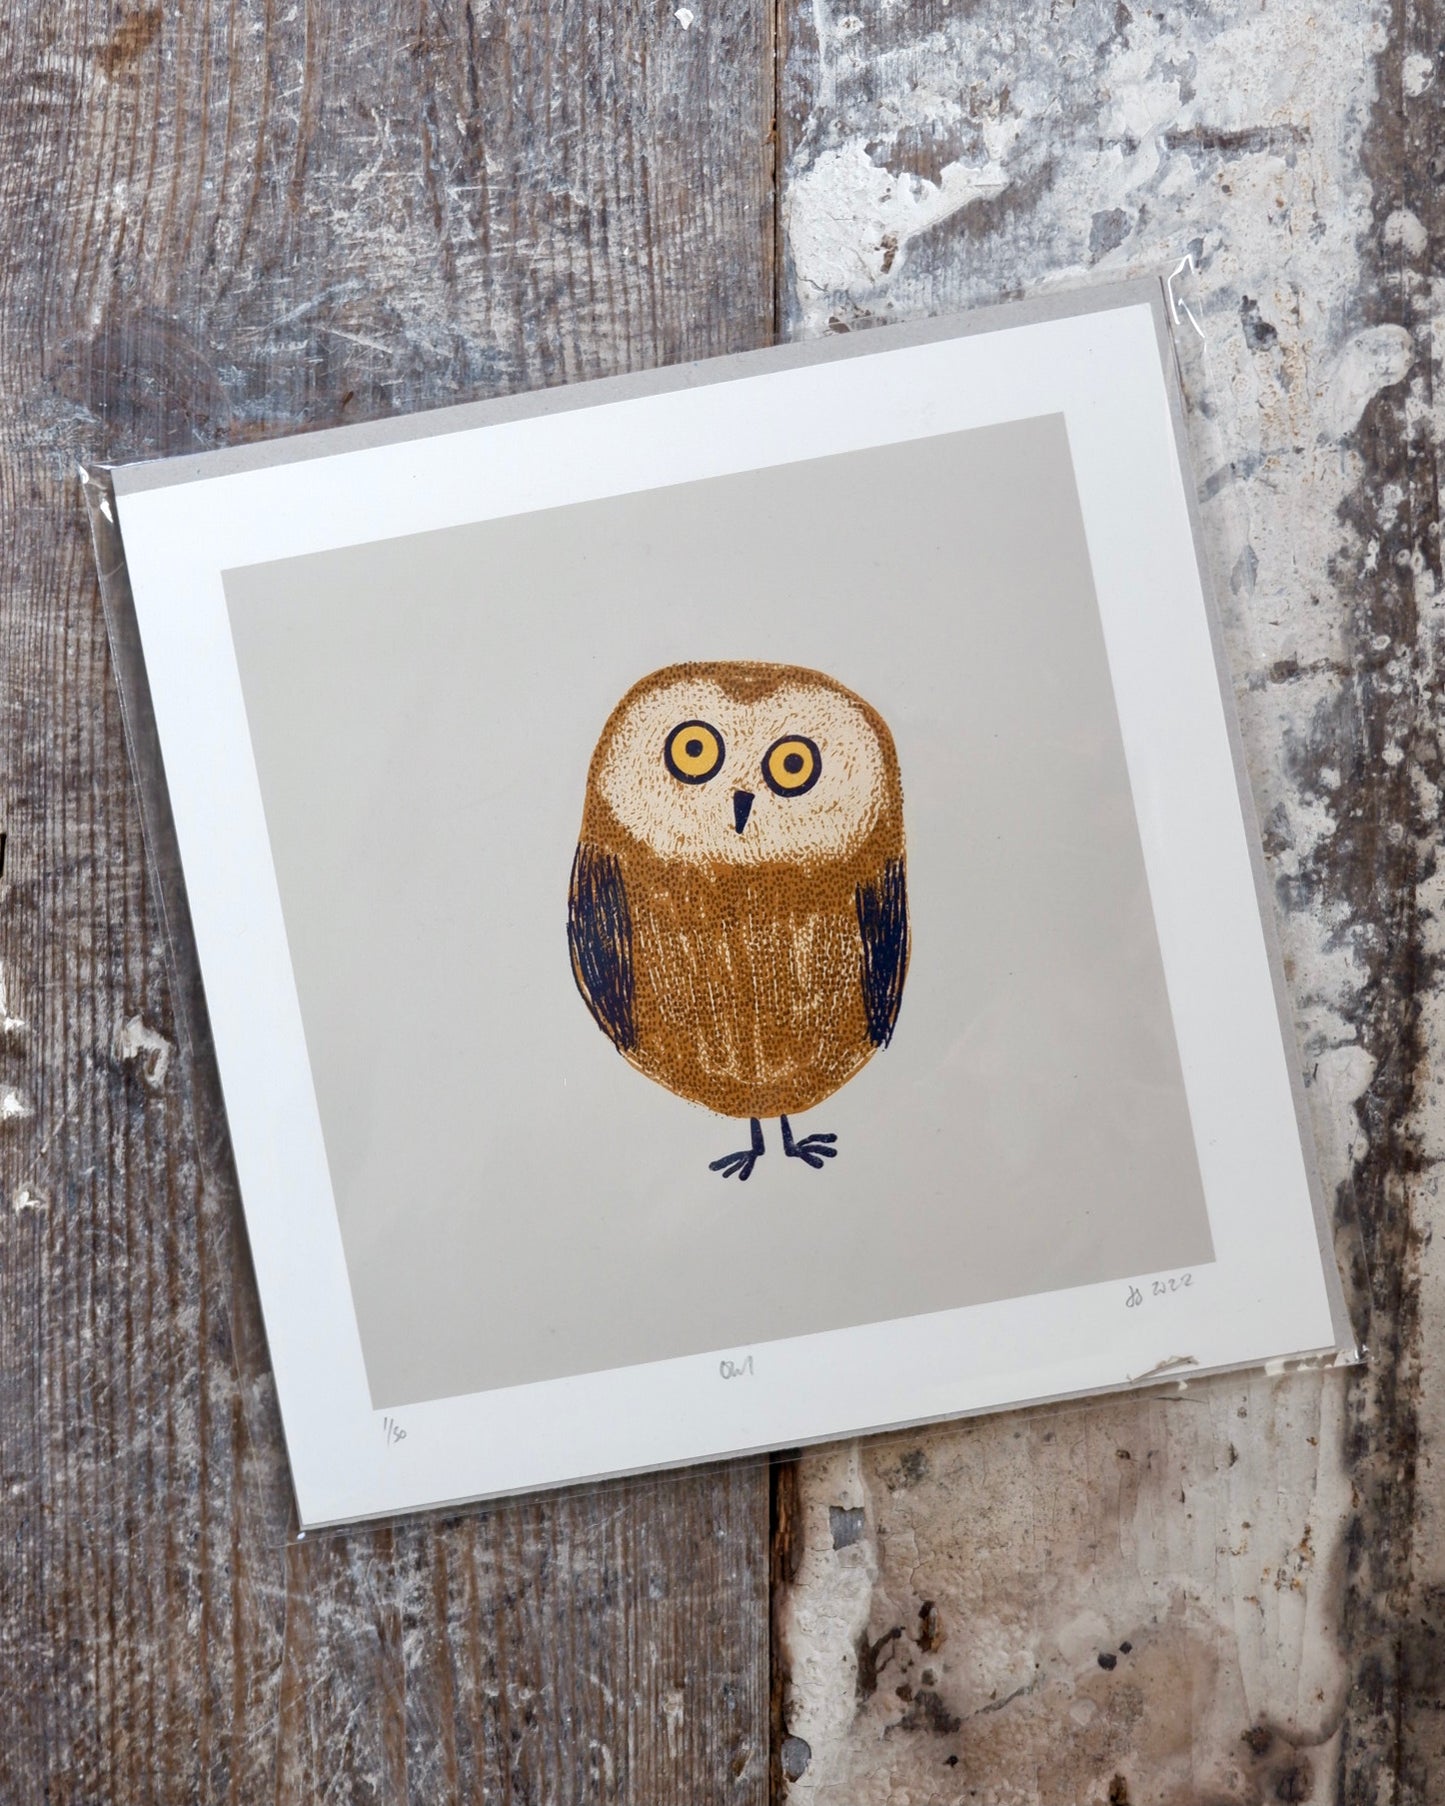 Owl limited edition giclee print